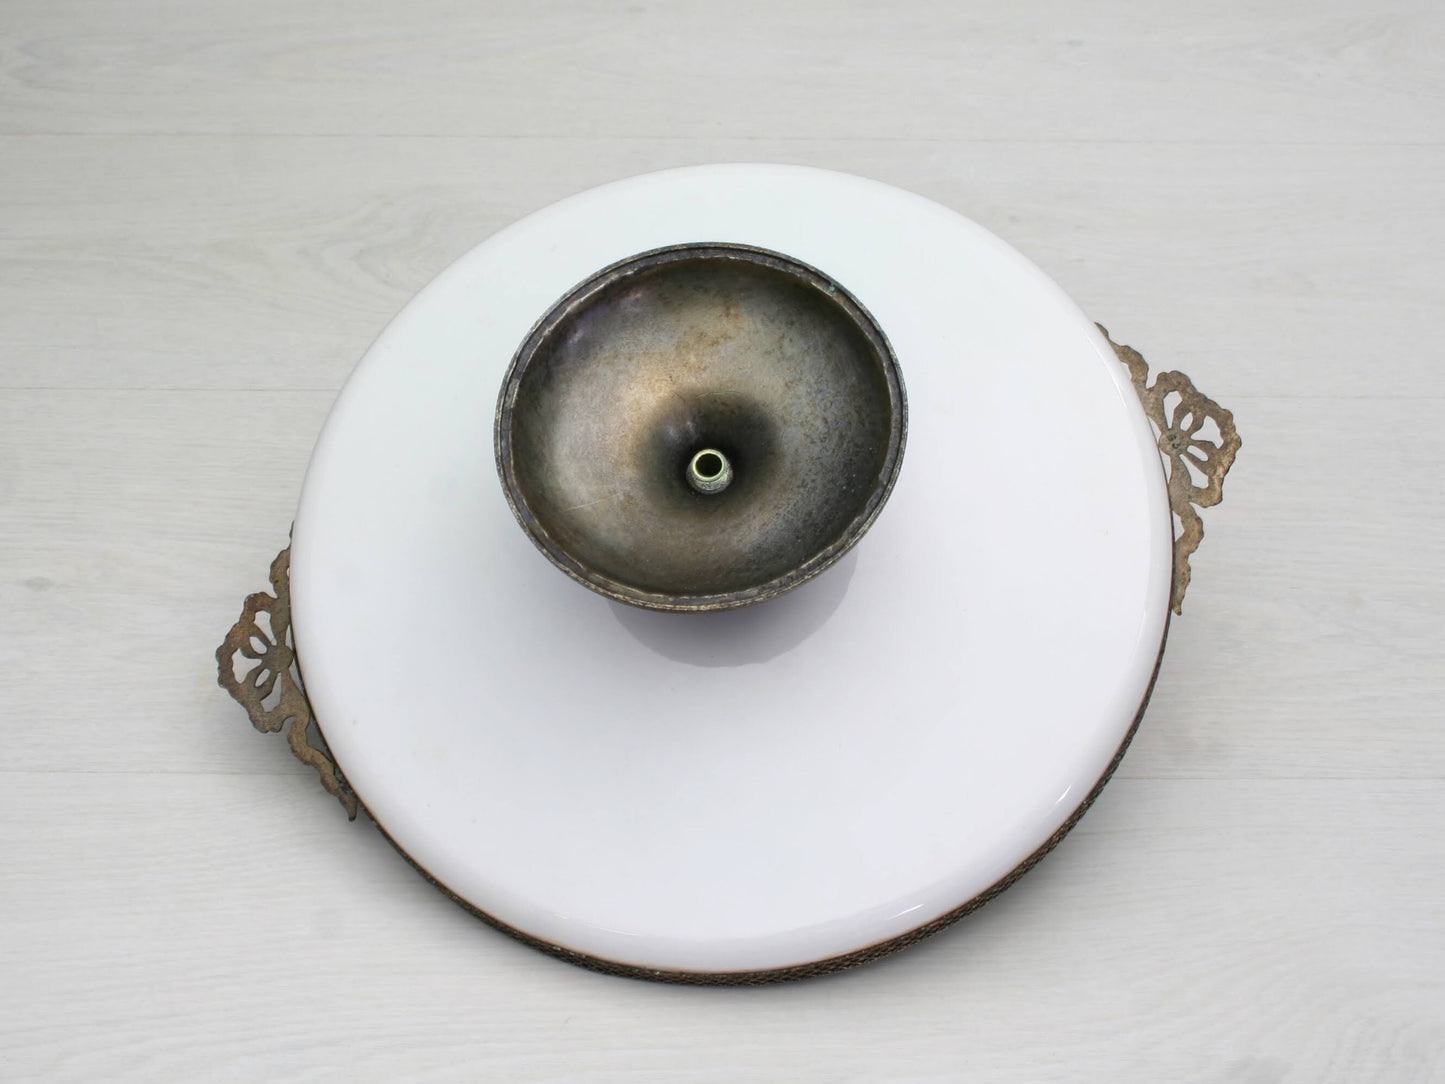 Pedestal Dish -Serving Plate | Trinket Dish or Catch All for Kitchen Decor